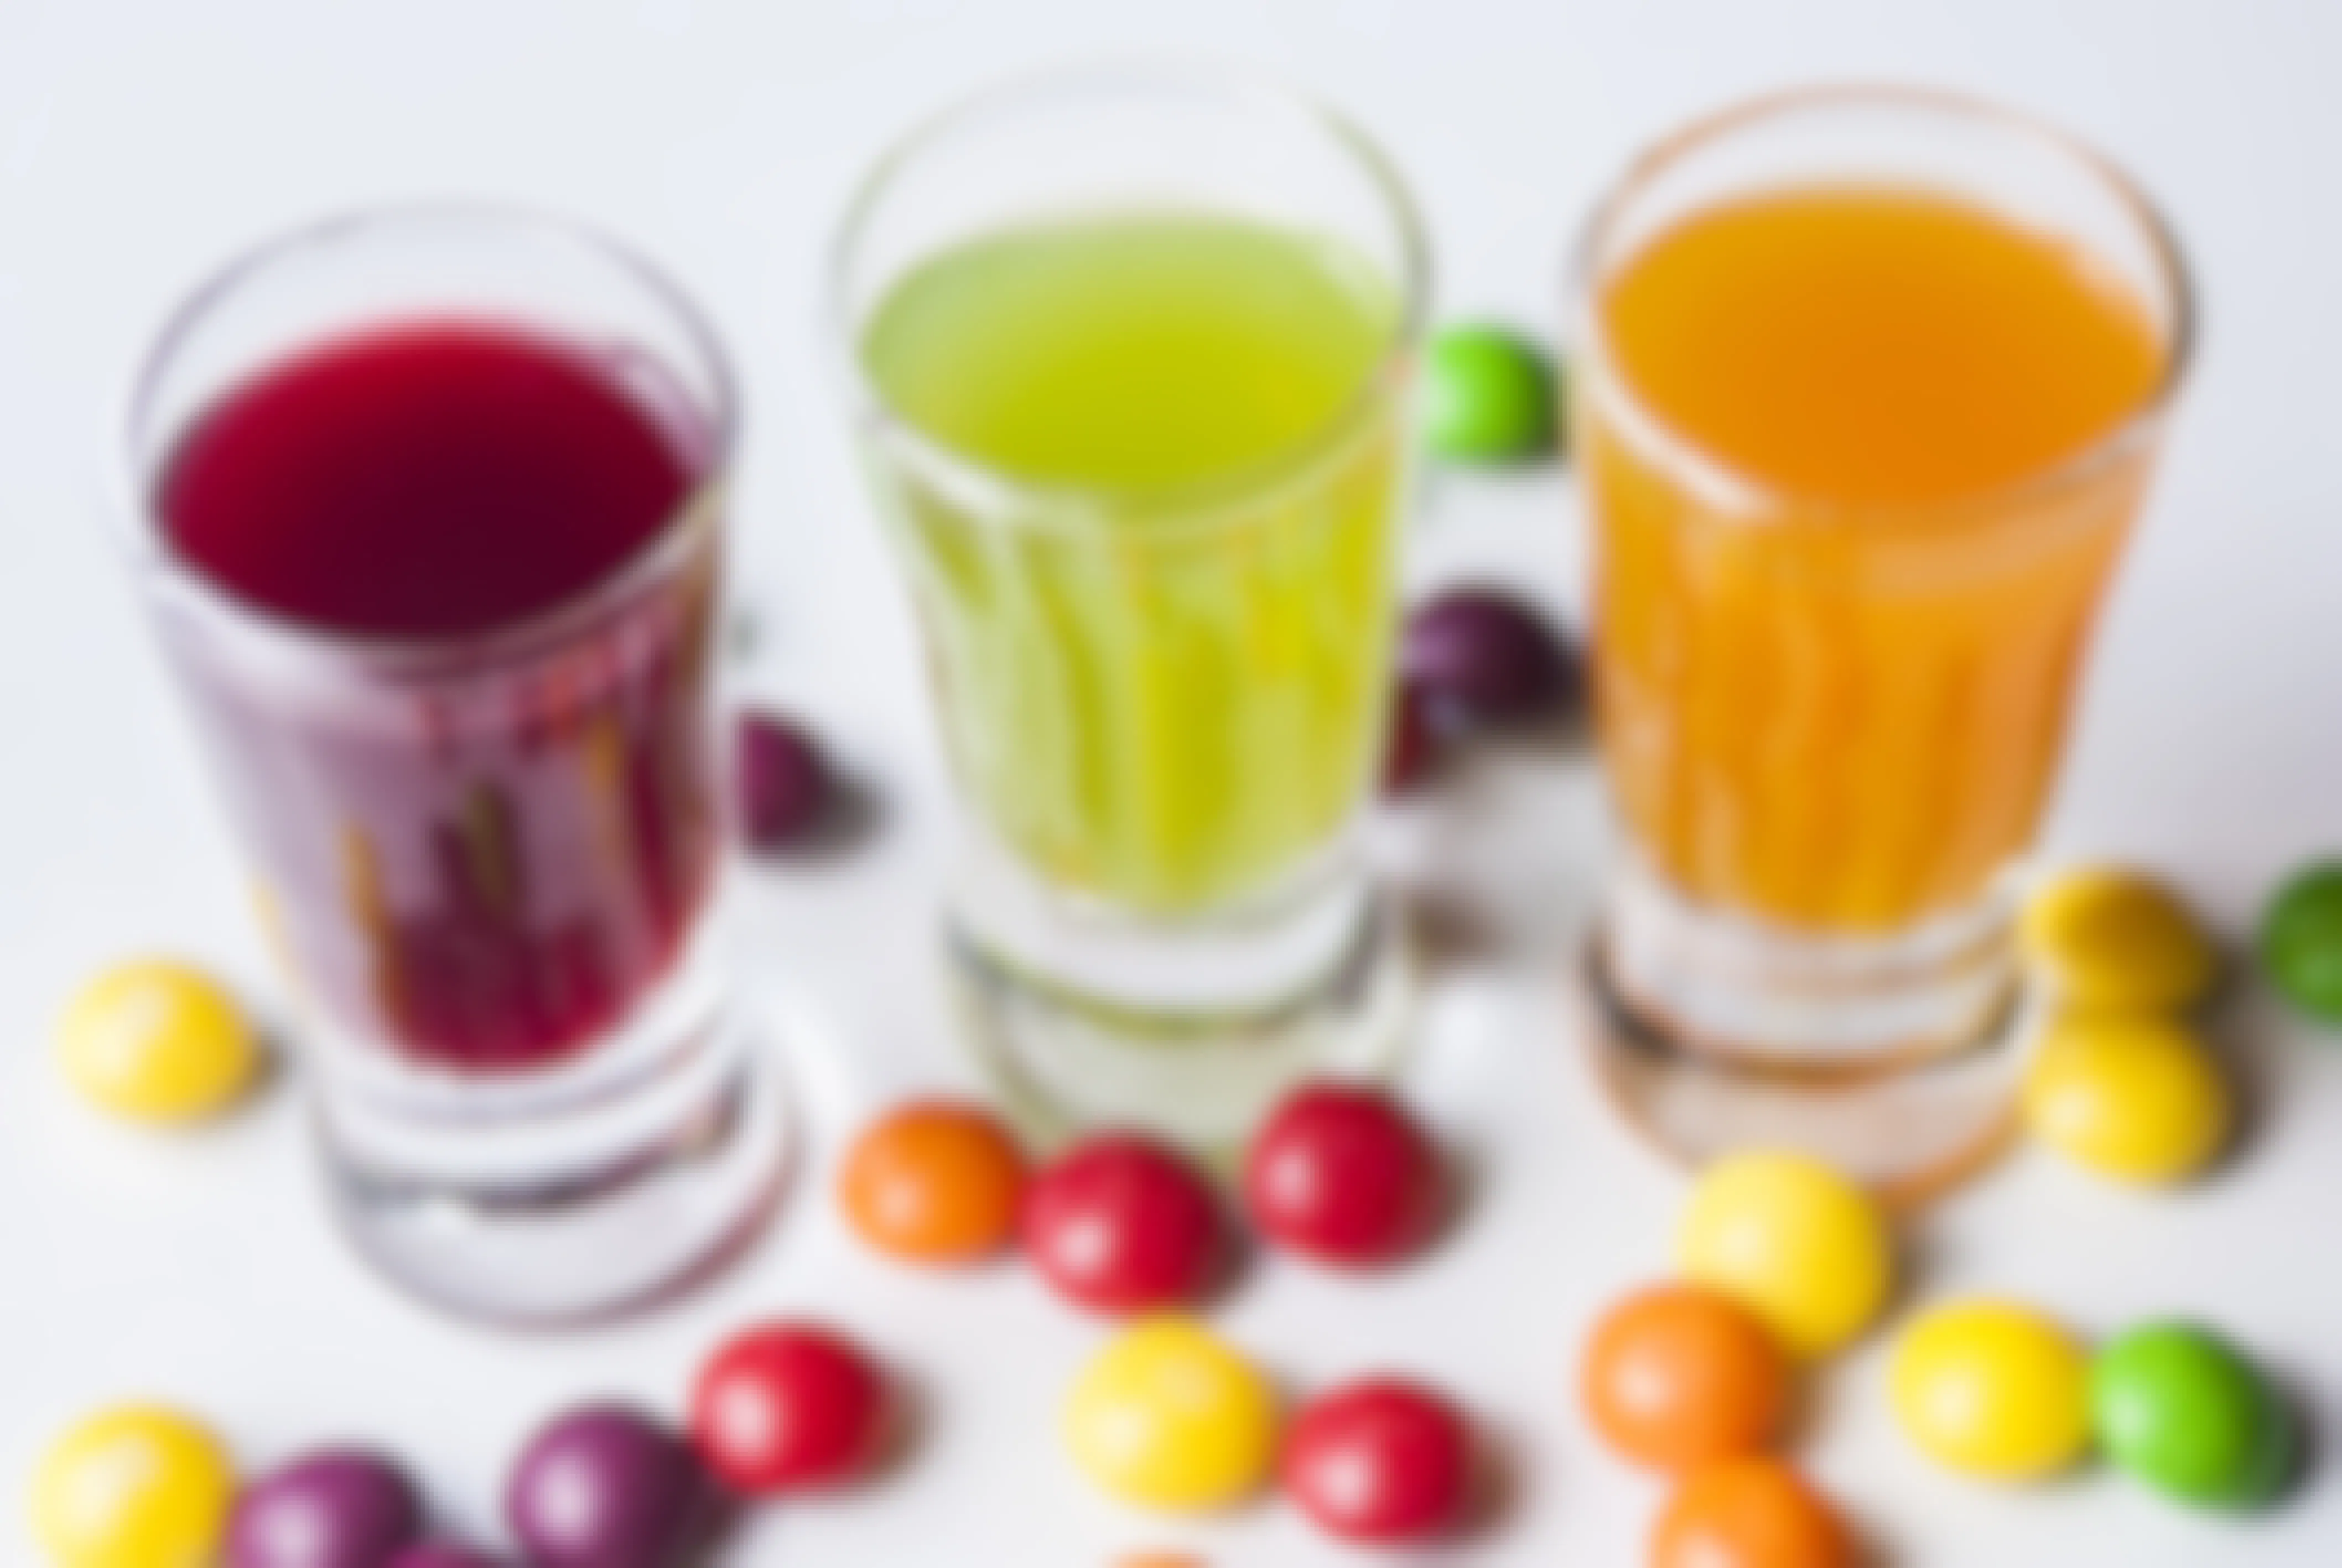 Three shot glasses filled with colorful liquor with colorful candies scattered on the table.